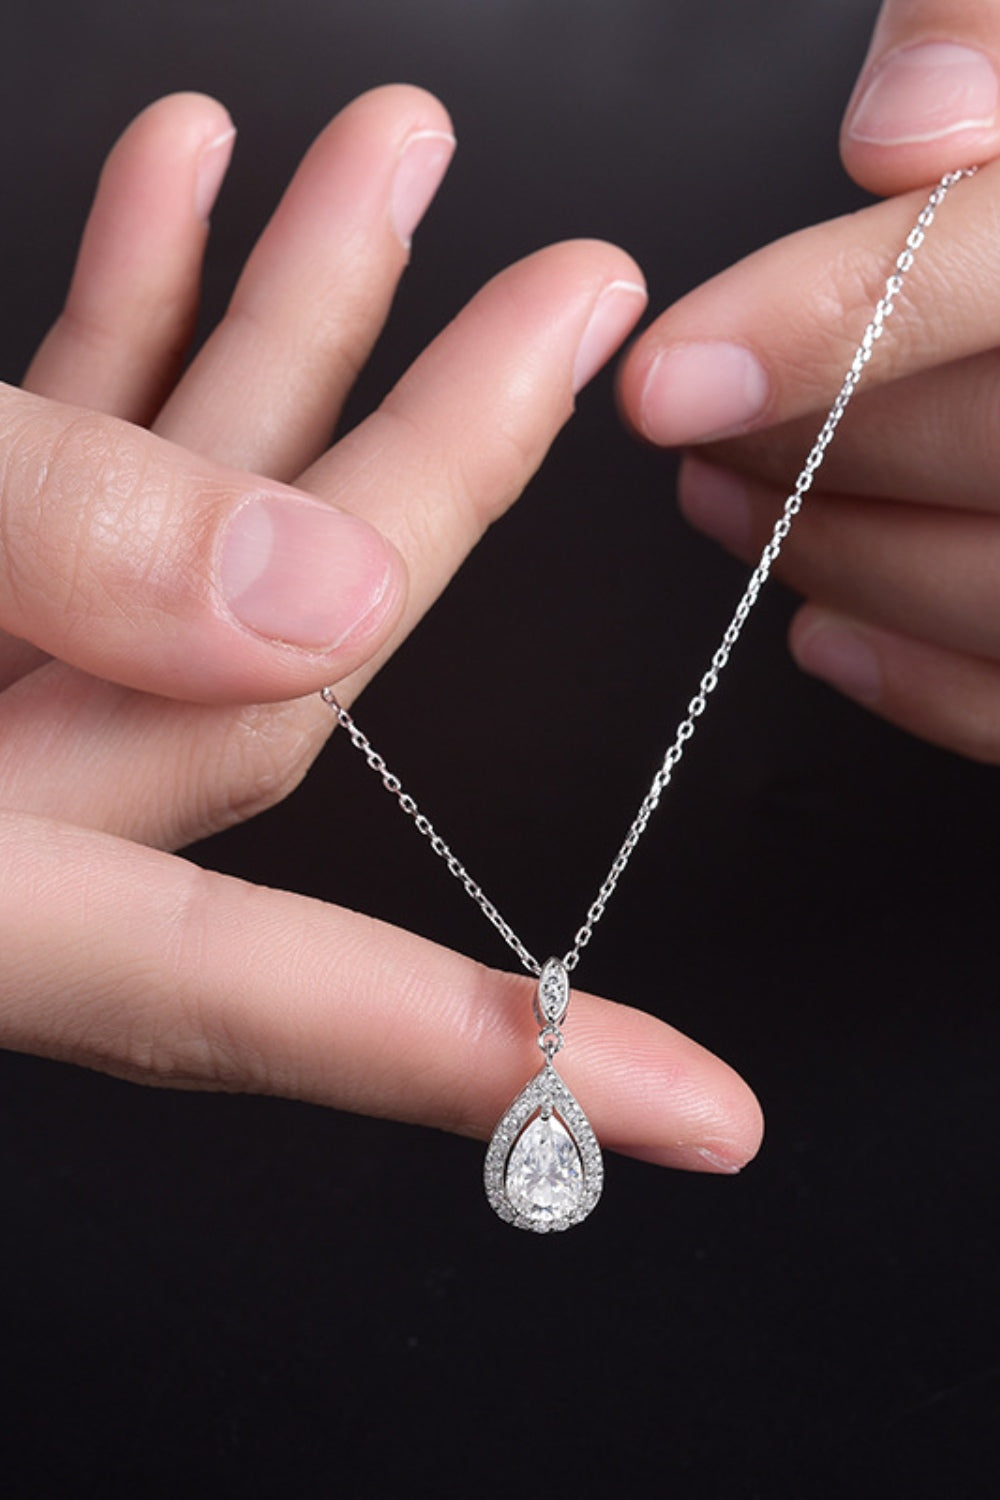 1.5 Carat Moissanite 925 Sterling Silver Teardrop Necklace - Tophatter Deals and Online Shopping - Electronics, Jewelry, Beauty, Health, Gadgets, Fashion - Tophatter's Discounts & Offers - tophatters